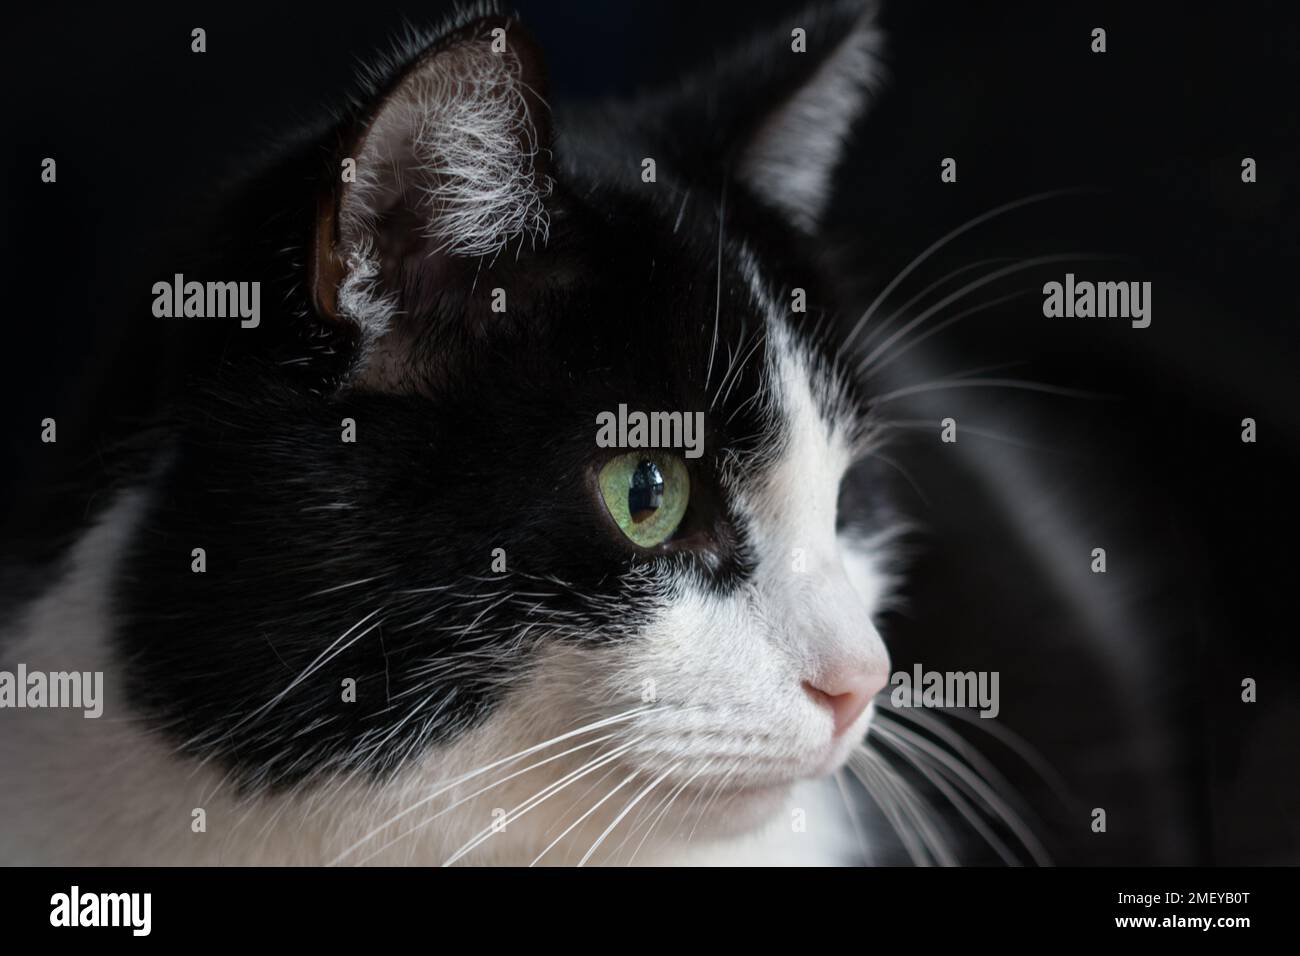 Closeup of black and white cat's head - green eyes Stock Photo